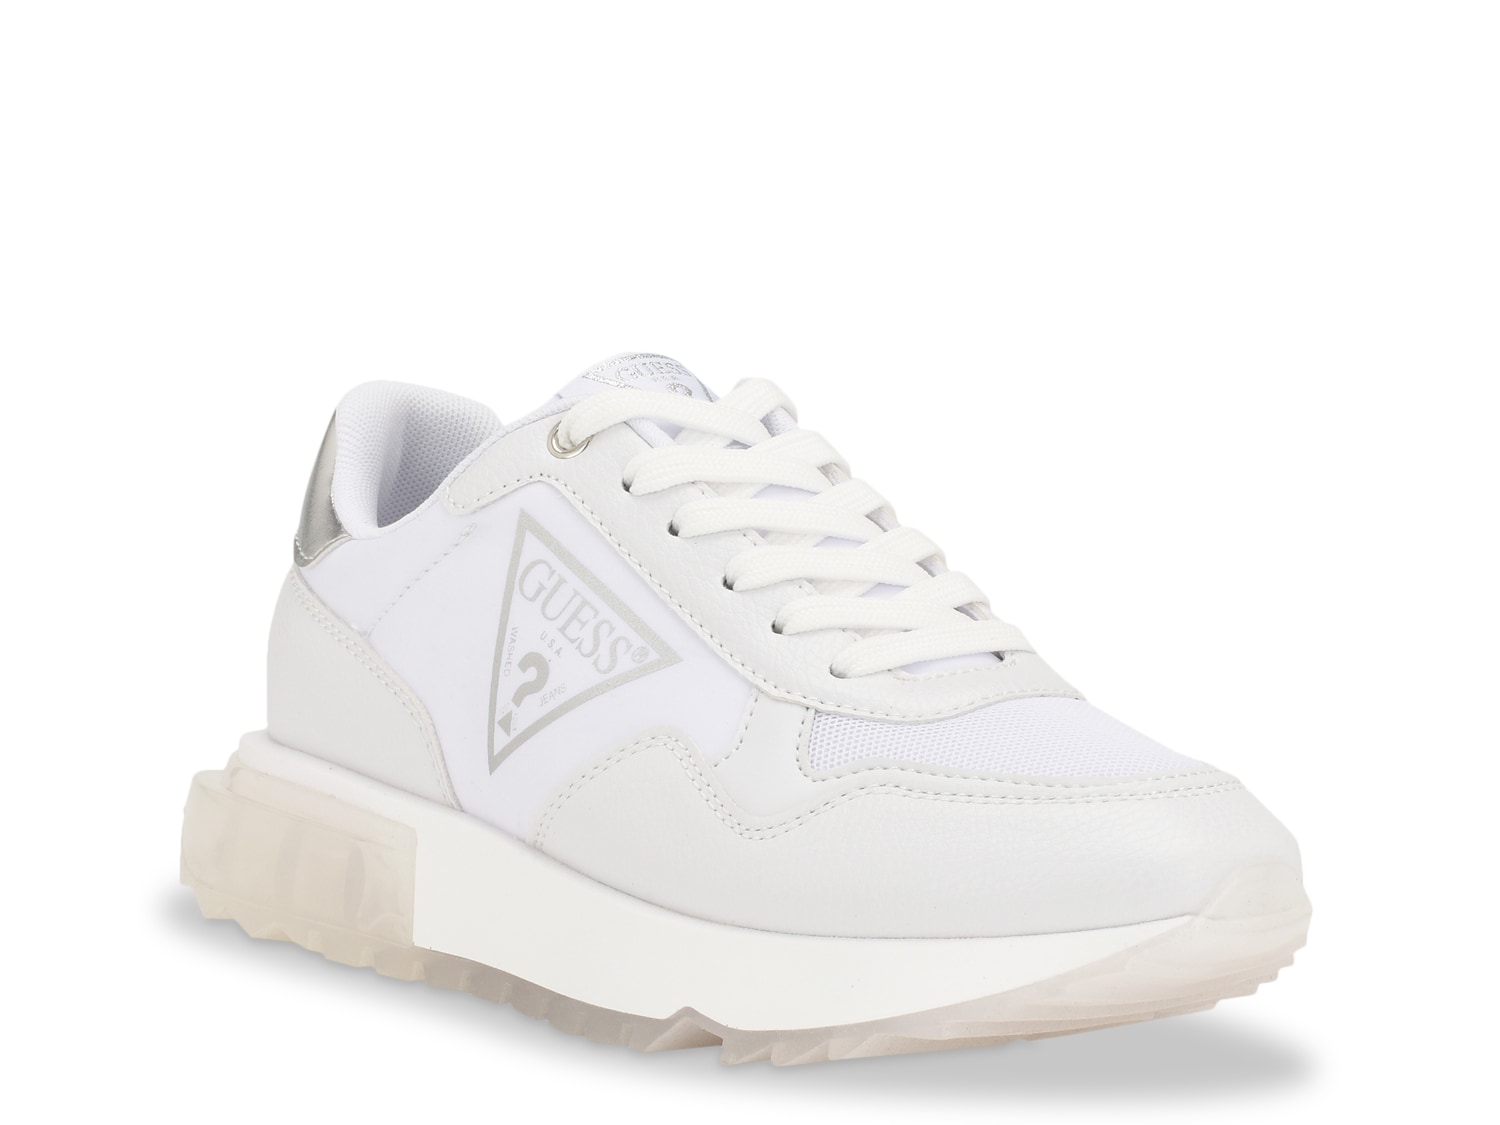 Guess Melany Sneaker - Free Shipping | DSW